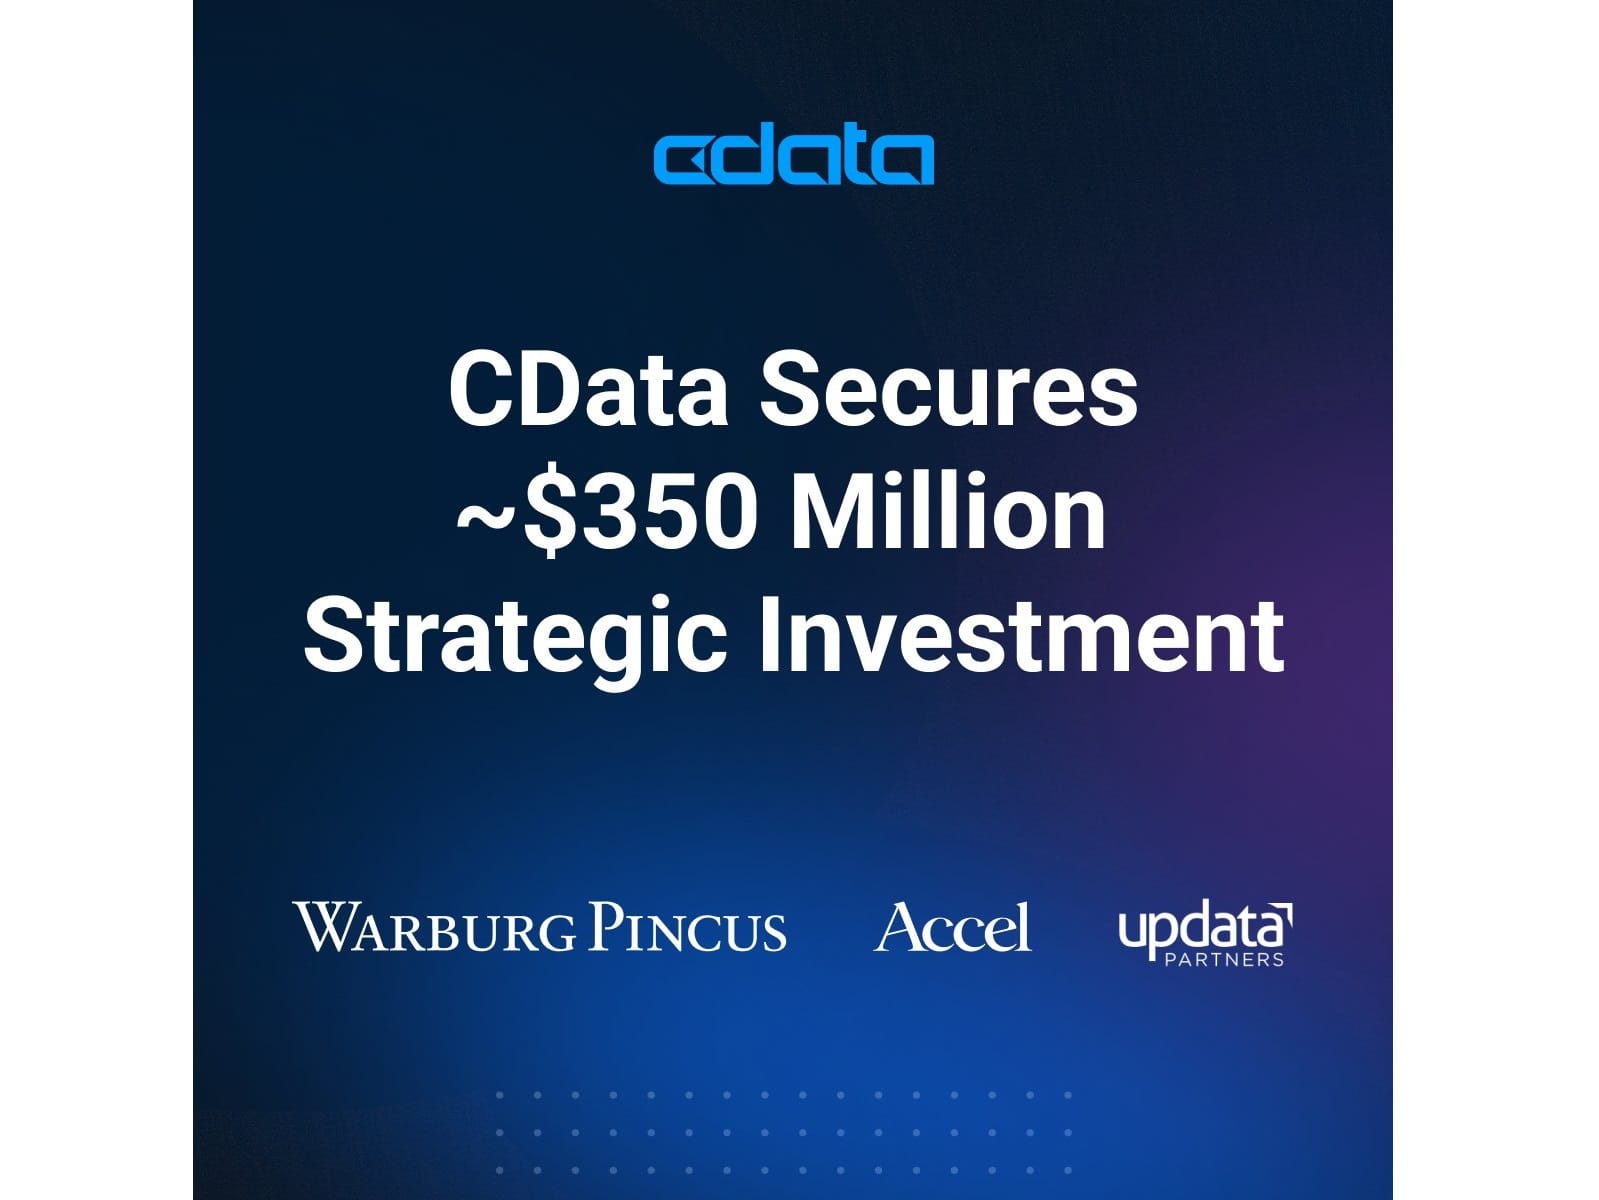 Data connectivity leader CData secures a ~$350M investment round